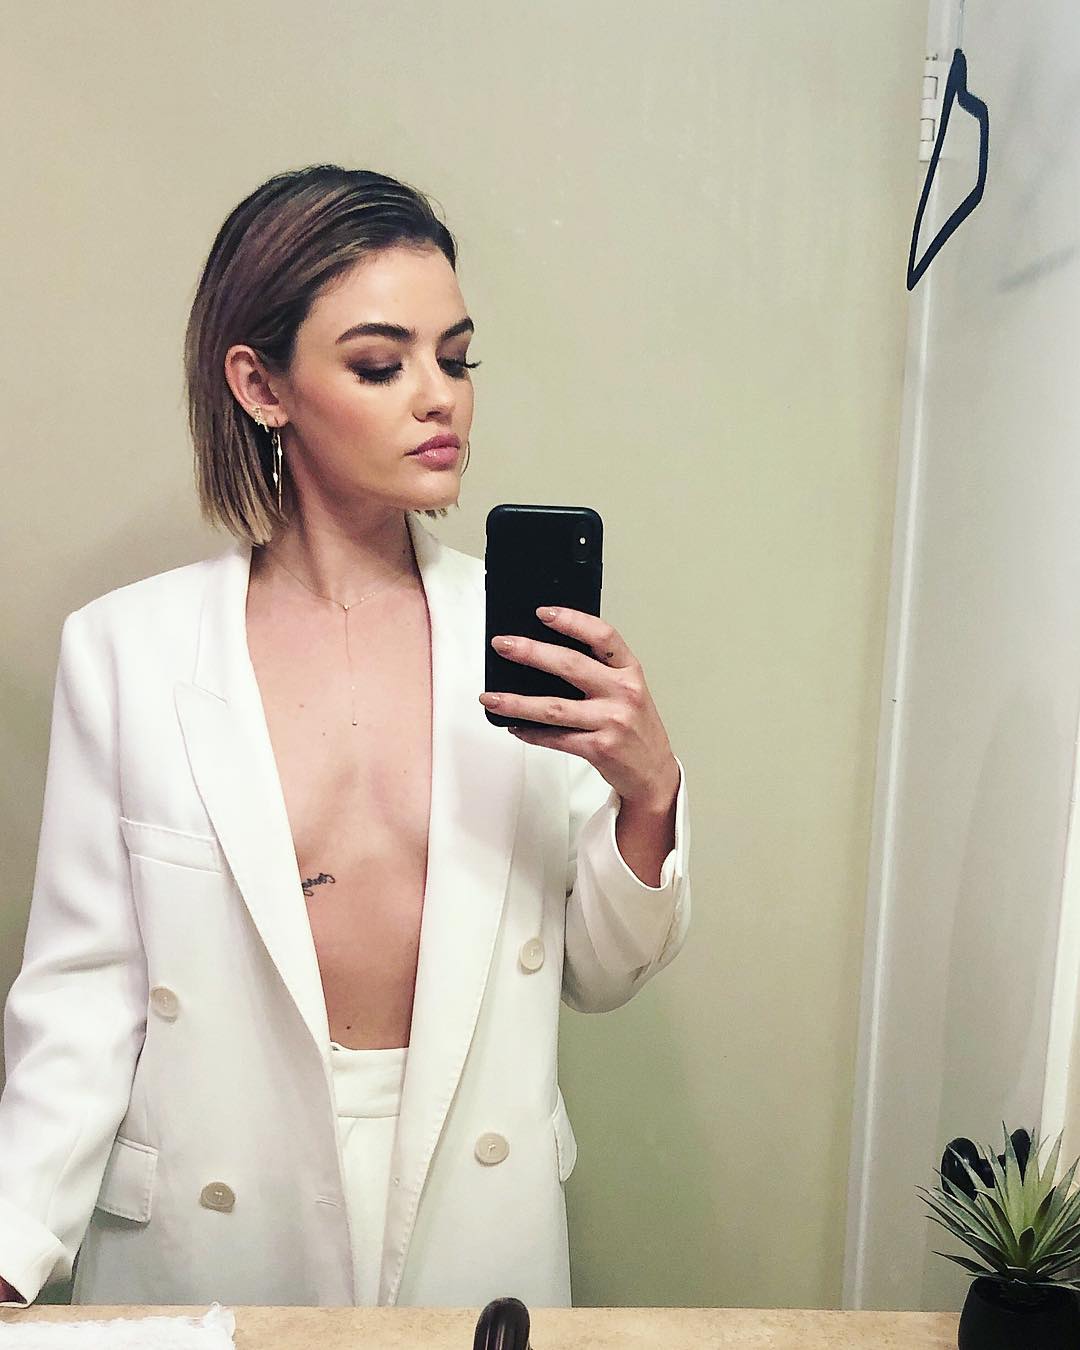 annie terrill recommends Lucy Hale Toppless Photos